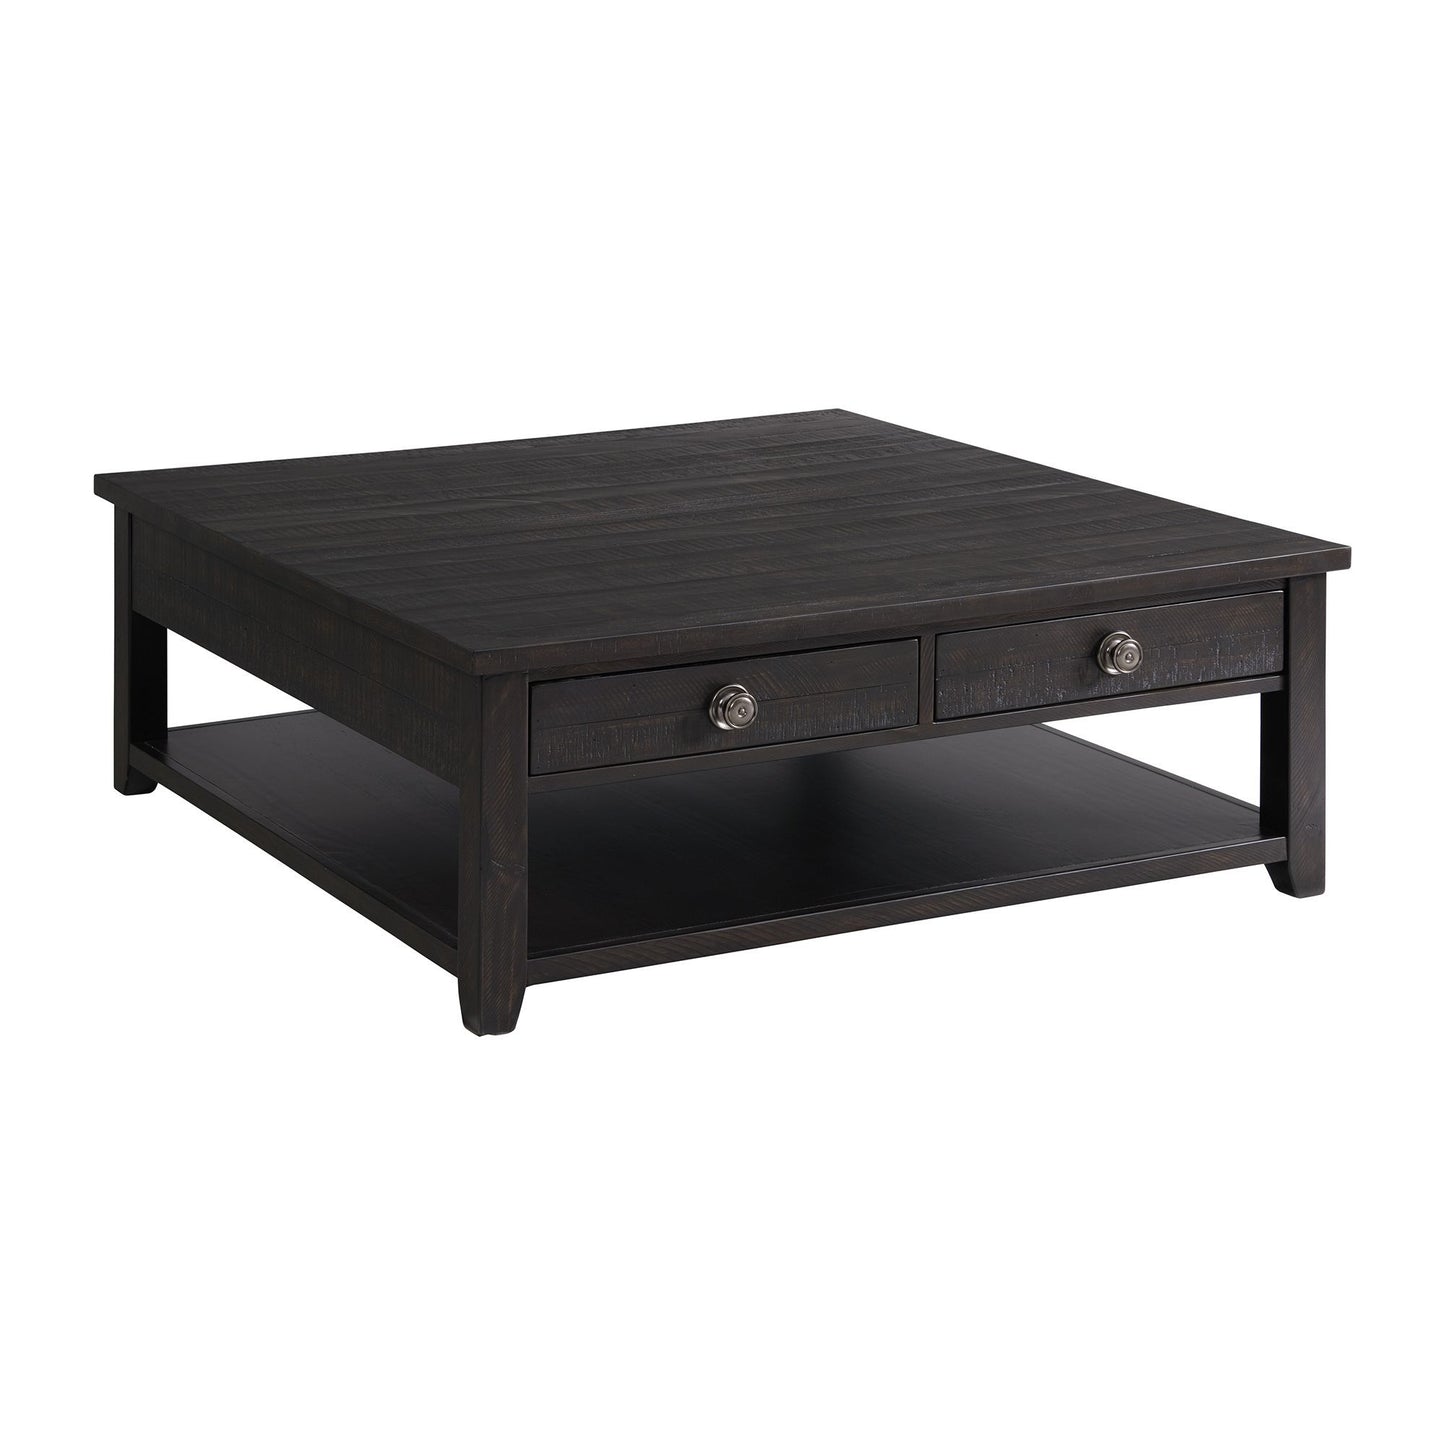 Kendyl - Occasional Square Coffee Table - Brown